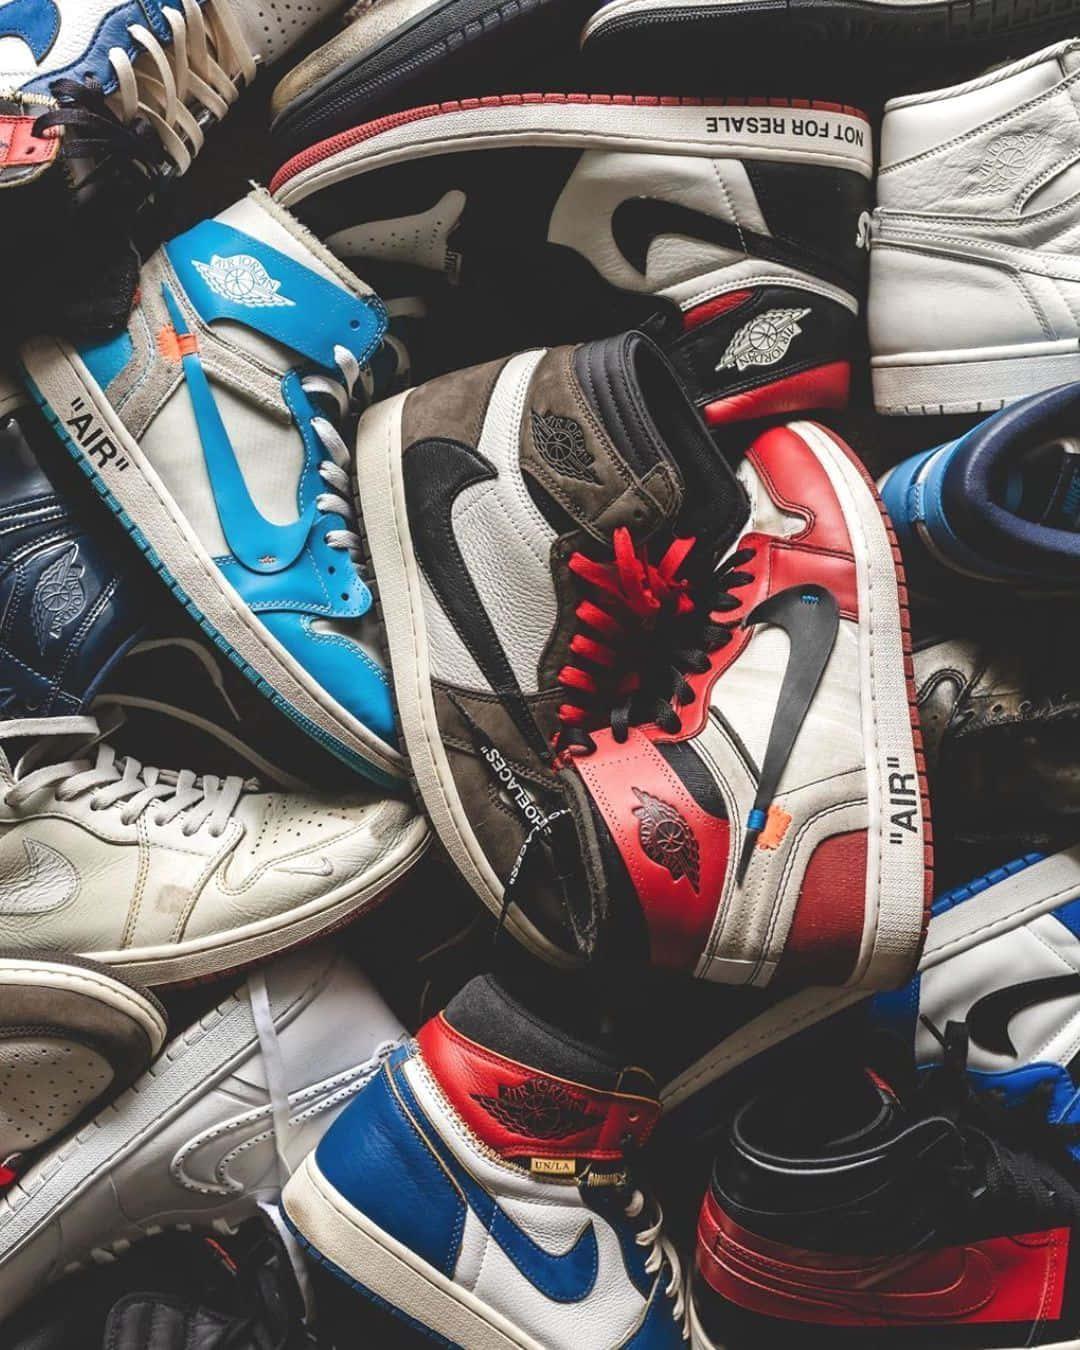 Check out the stylish Off White Jordan 1 sneakers Wallpaper